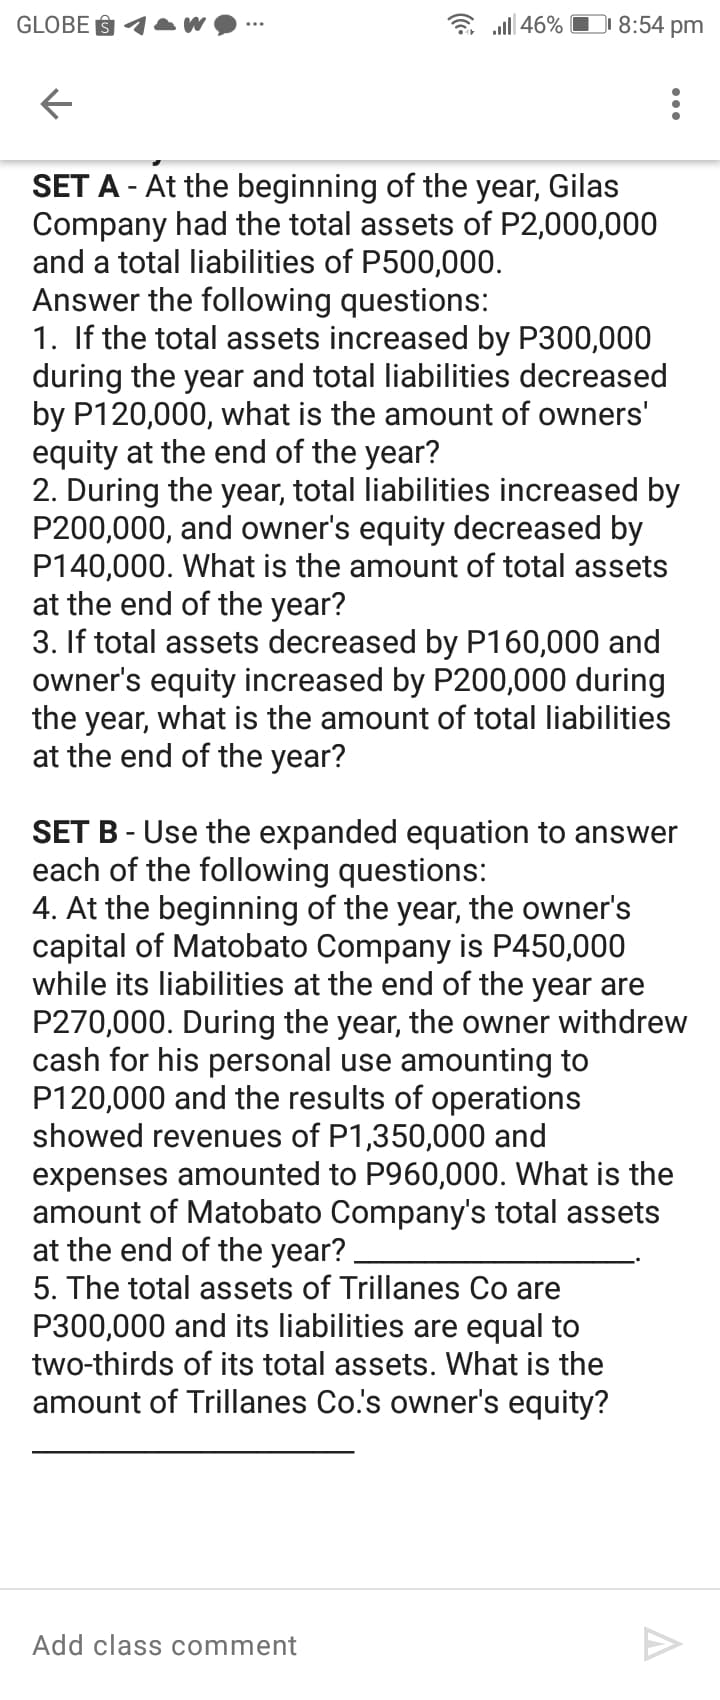 GLOBE § 1AW
a all 46% O 8:54 pm
SET A - At the beginning of the year, Gilas
Company had the total assets of P2,000,000
and a total liabilities of P500,000.
Answer the following questions:
1. If the total assets increased by P300,000
during the year and total liabilities decreased
by P120,000, what is the amount of owners'
equity at the end of the year?
2. During the year, total liabilities increased by
P200,000, and owner's equity decreased by
P140,000. What is the amount of total assets
at the end of the year?
3. If total assets decreased by P160,000 and
owner's equity increased by P200,000 during
the year, what is the amount of total liabilities
at the end of the year?
SET B - Use the expanded equation to answer
each of the following questions:
4. At the beginning of the year, the owner's
capital of Matobato Company is P450,000
while its liabilities at the end of the year are
P270,000. During the year, the owner withdrew
cash for his personal use amounting to
P120,000 and the results of operations
showed revenues of P1,350,000 and
expenses amounted to P960,000. What is the
amount of Matobato Company's total assets
at the end of the year?.
5. The total assets of Trillanes Co are
P300,000 and its liabilities are equal to
two-thirds of its total assets. What is the
amount of Trillanes Co.'s owner's equity?
Add class comment
